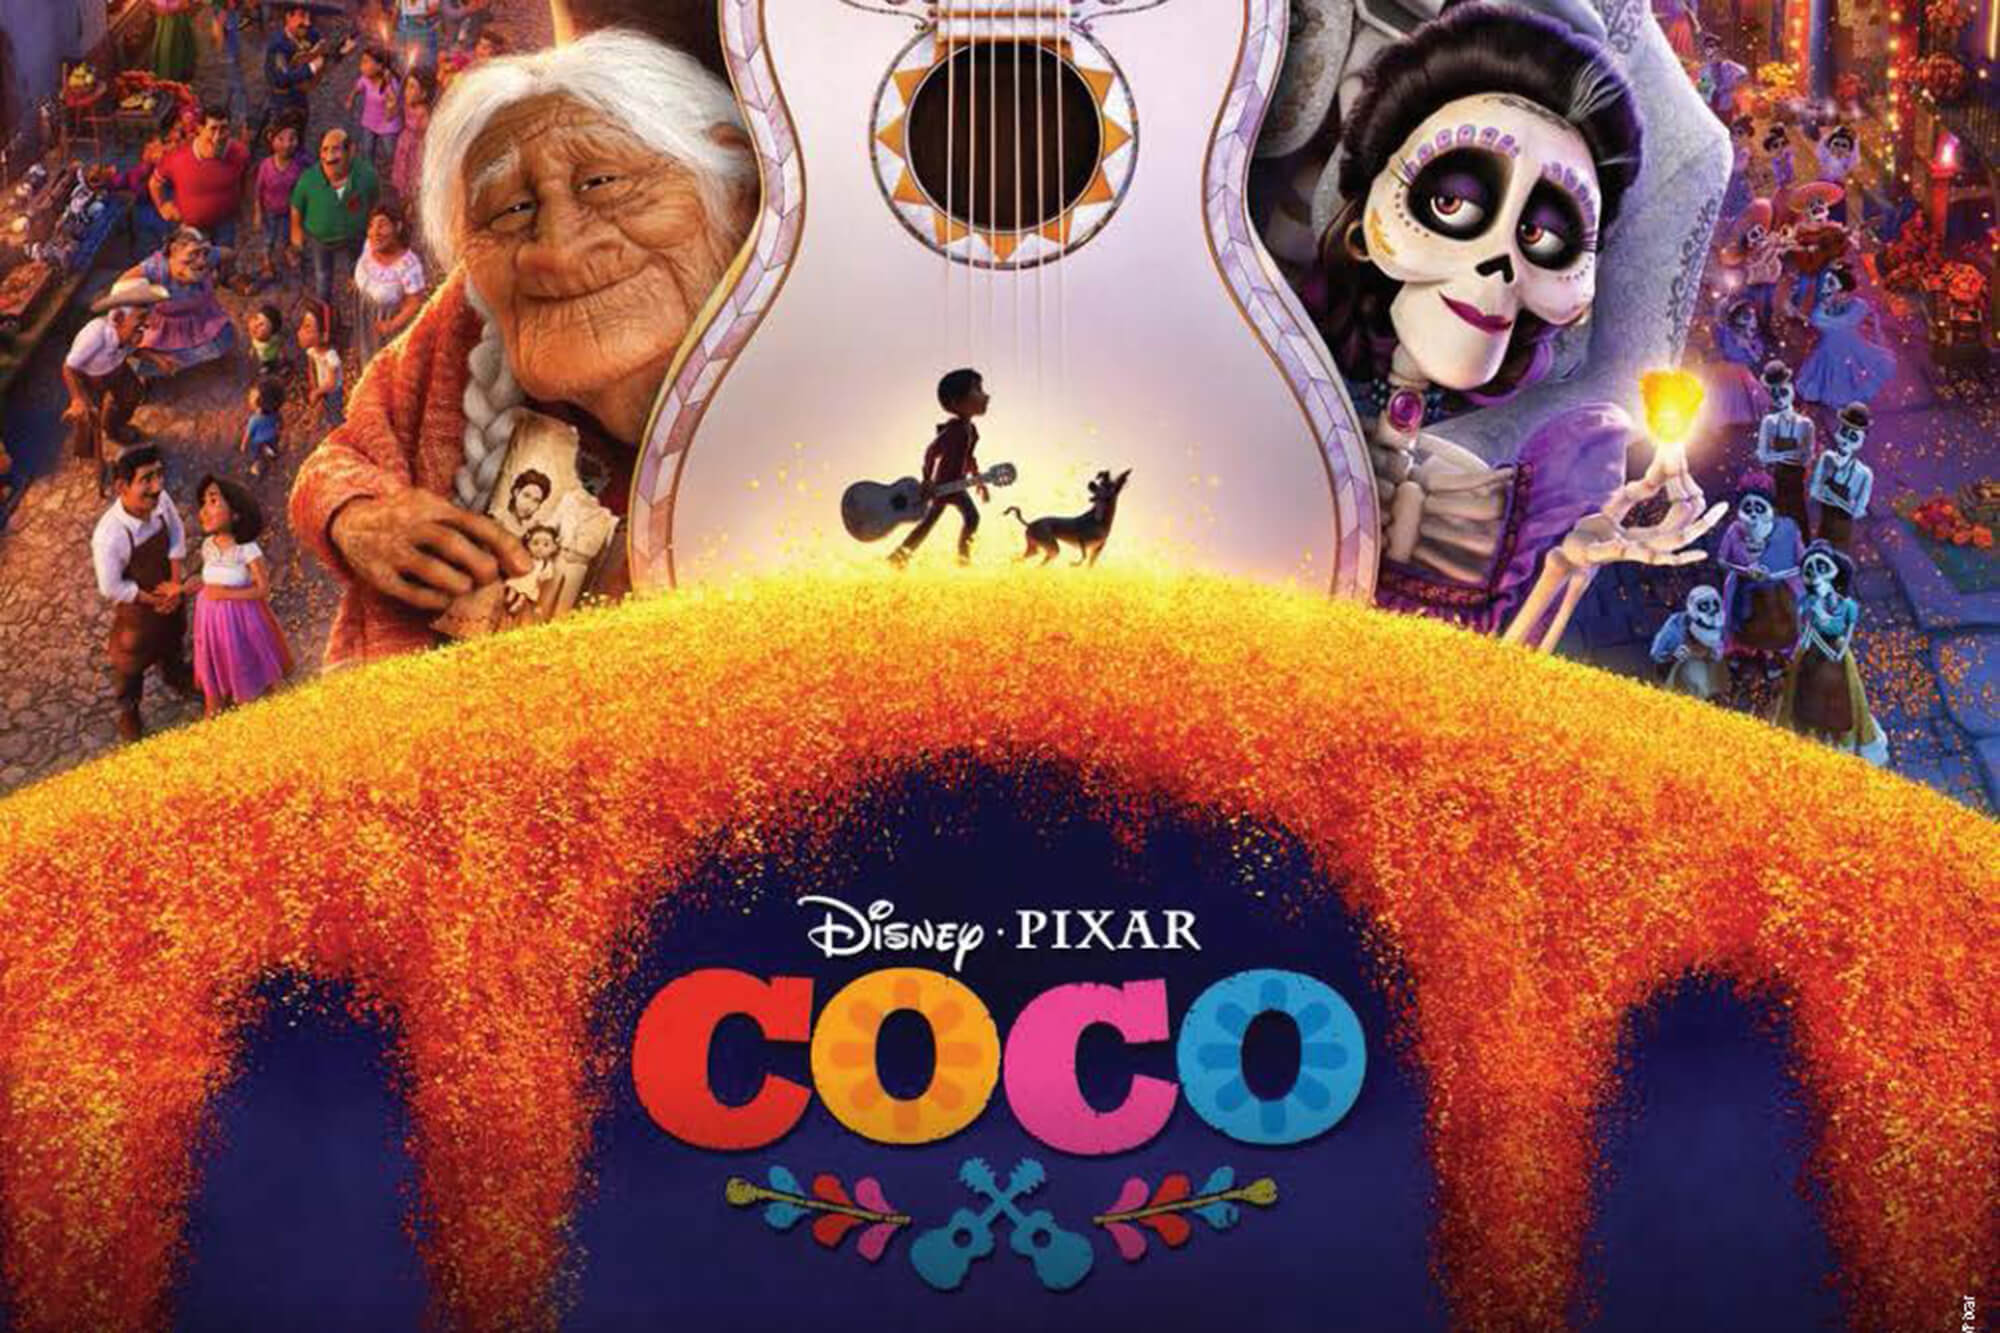 Image for "Coco" film to be shown on April 29.